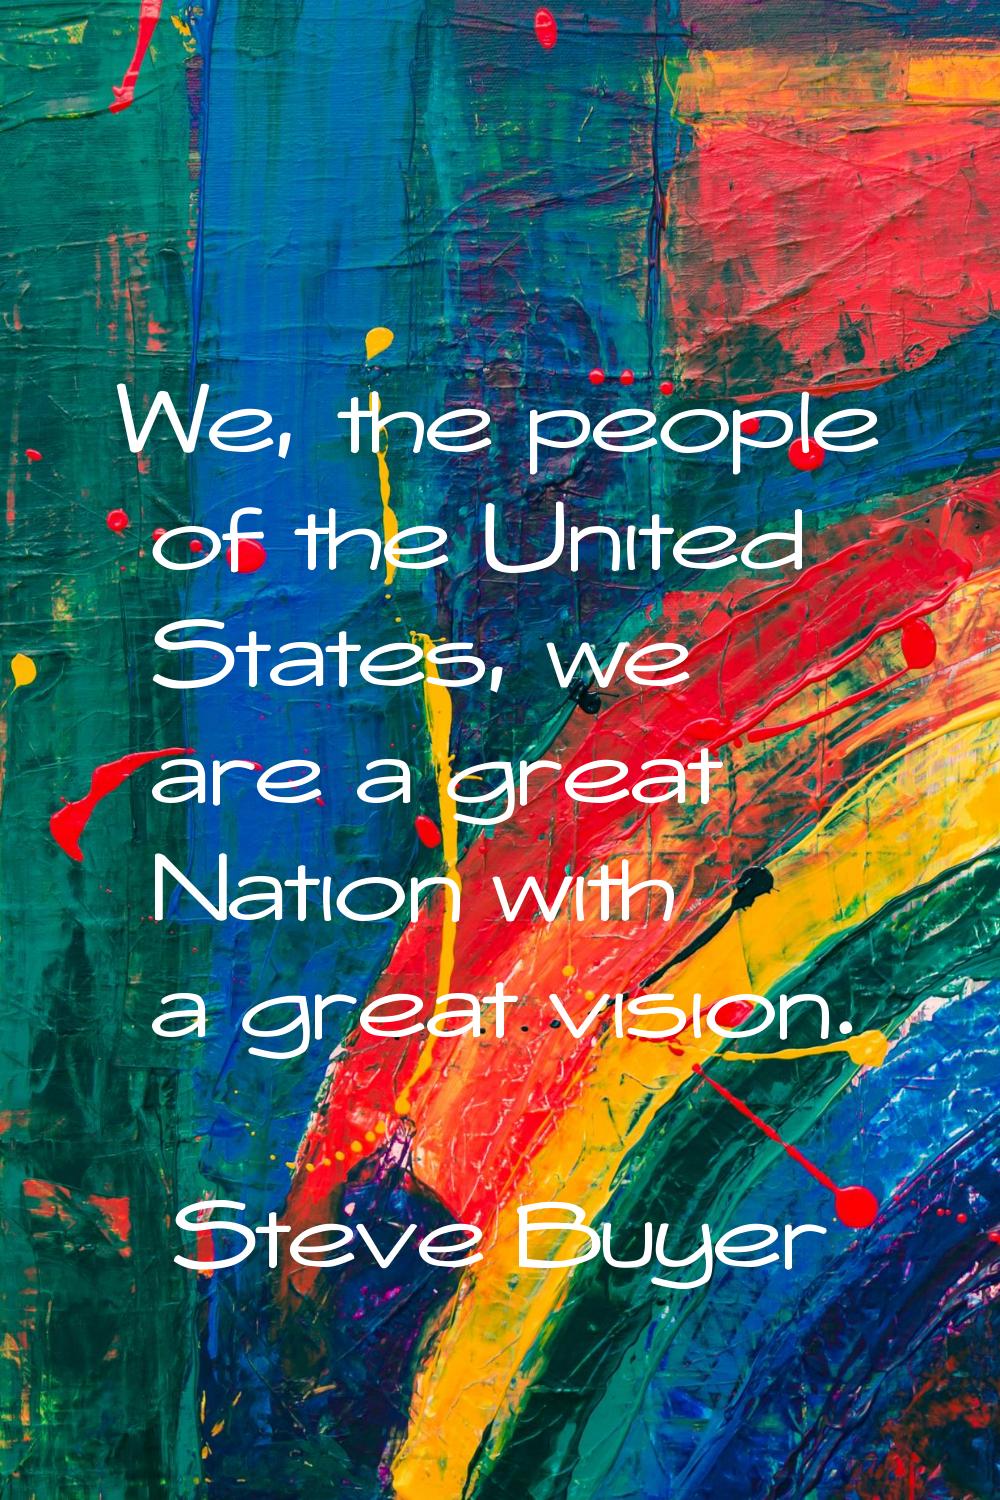 We, the people of the United States, we are a great Nation with a great vision.